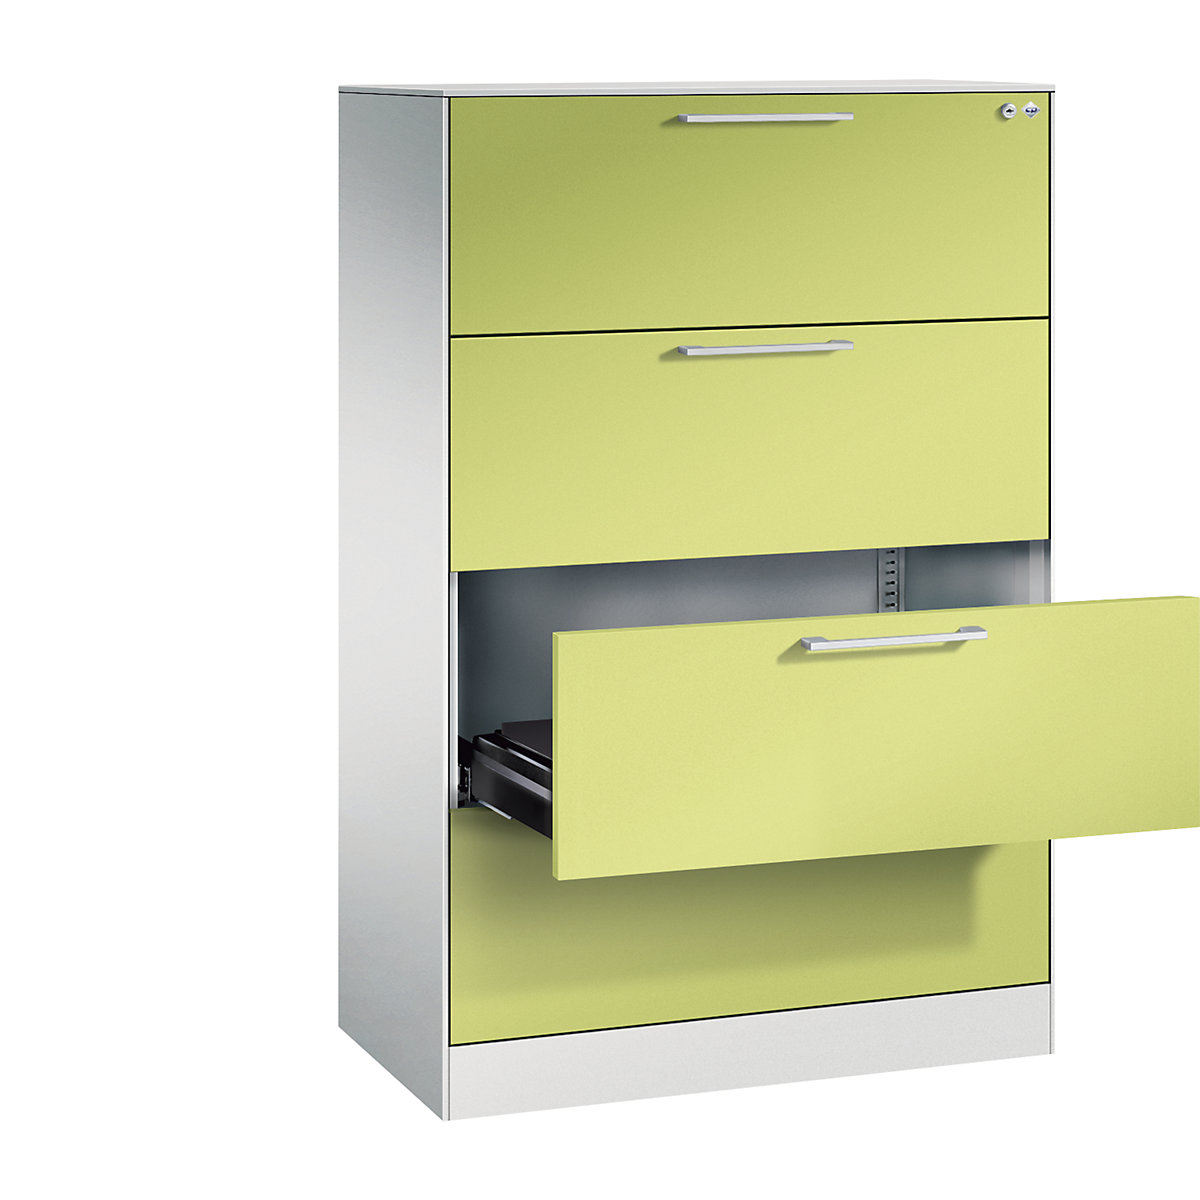 ASISTO card file cabinet – C+P, height 1292 mm, with 4 drawers, A4 landscape, light grey/viridian green-9